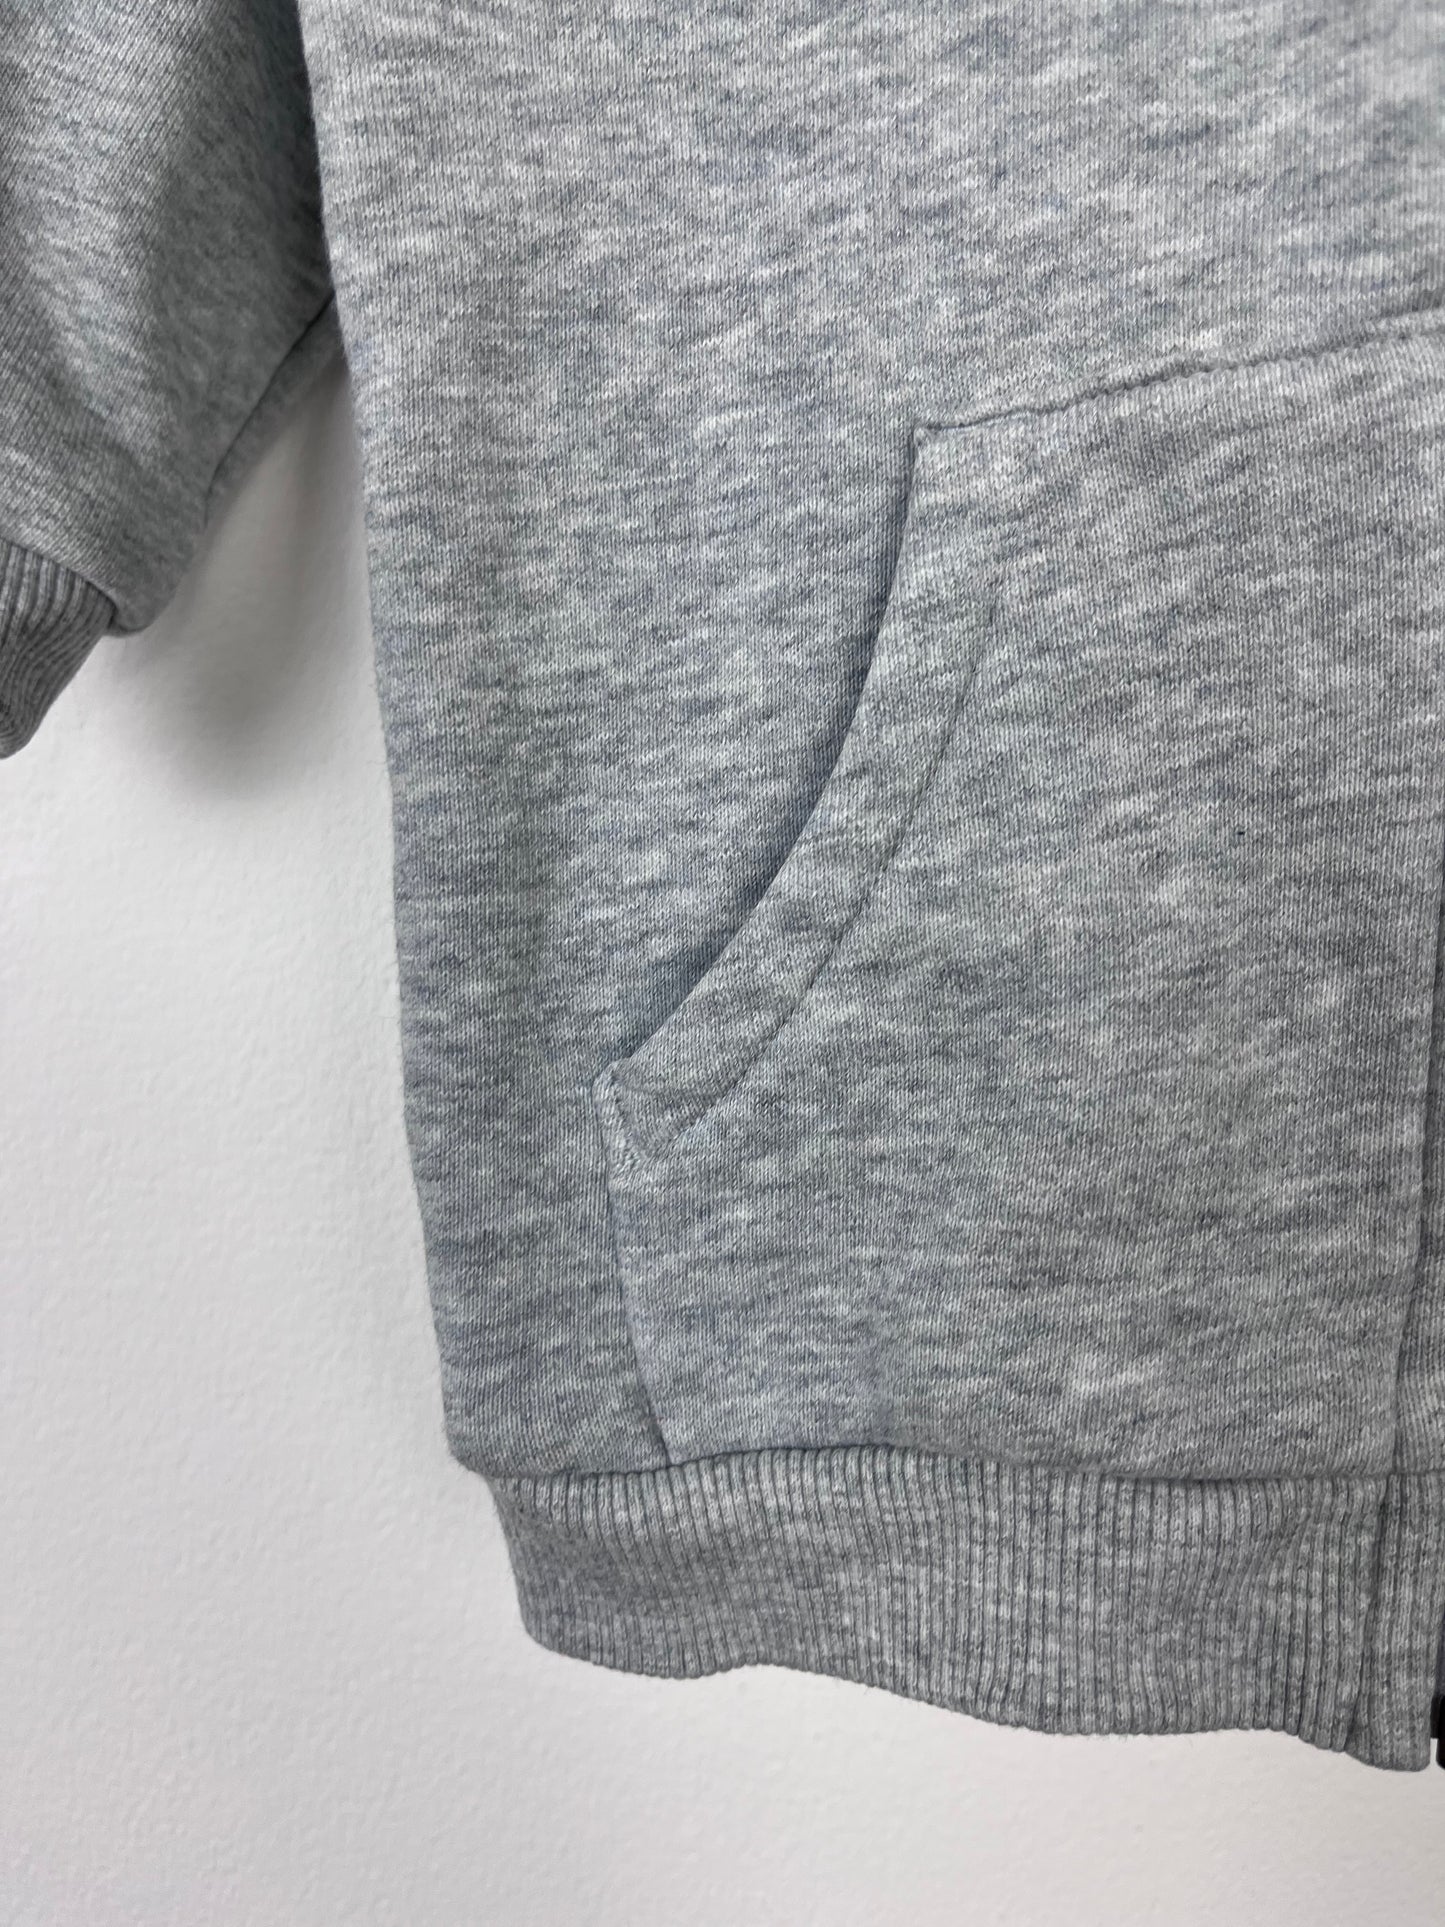 M&S 3-6 Months-Hoodies-Second Snuggle Preloved